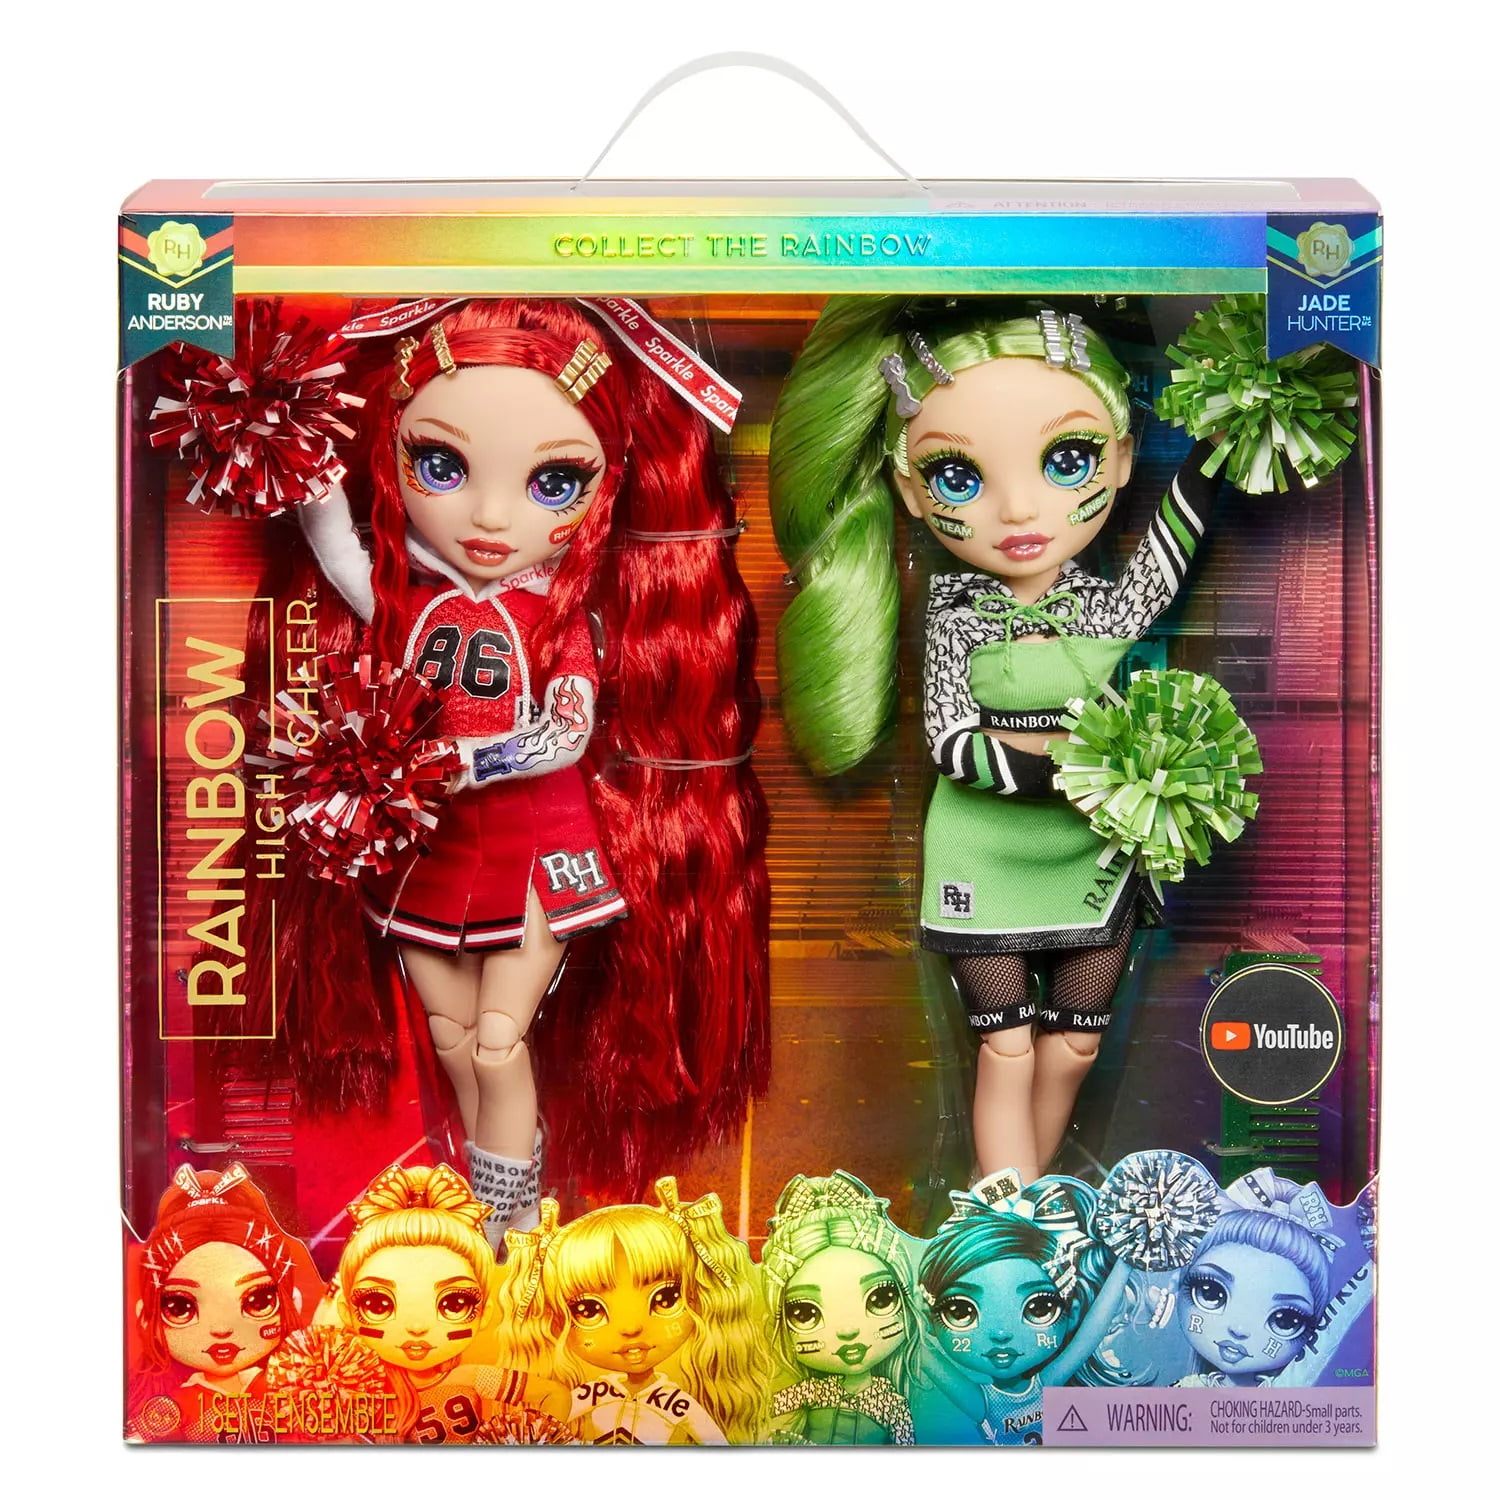 Rainbow High Cheer Ruby Anderson – Red Fashion Doll with Pom Poms 